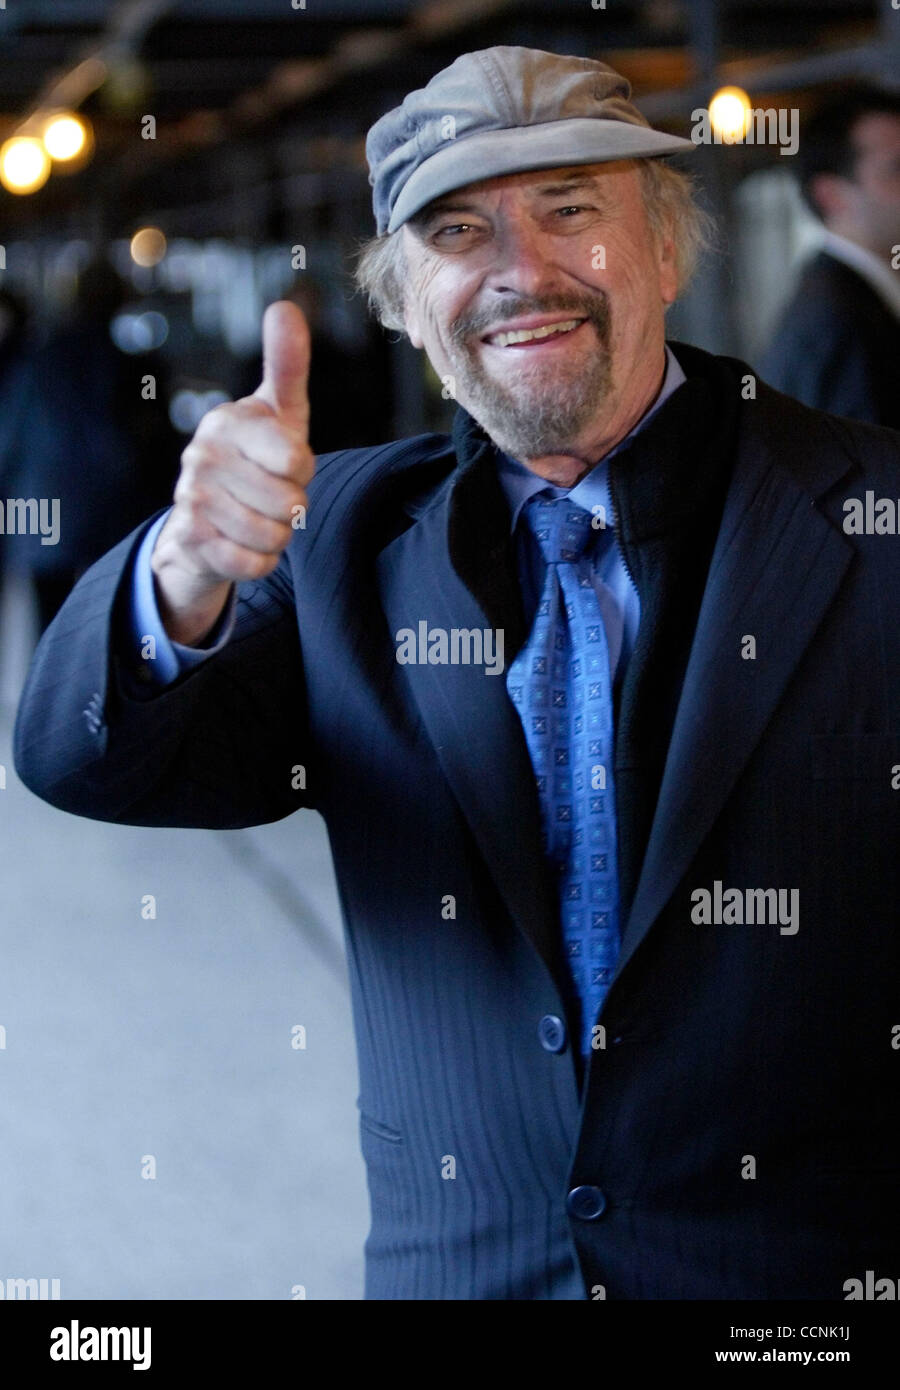 Oct 28, 2004; Manhattan, NY, USA; Actor Rip Torn gives a thumbs up as he leaves Manhattan Criminal Court, Thursday, Oct. 28, 2004, in New York. Torn was found not guilty on the charge of driving while intoxicated from an incident in January when his car rammed the back of a cab in Manhattan. Stock Photo